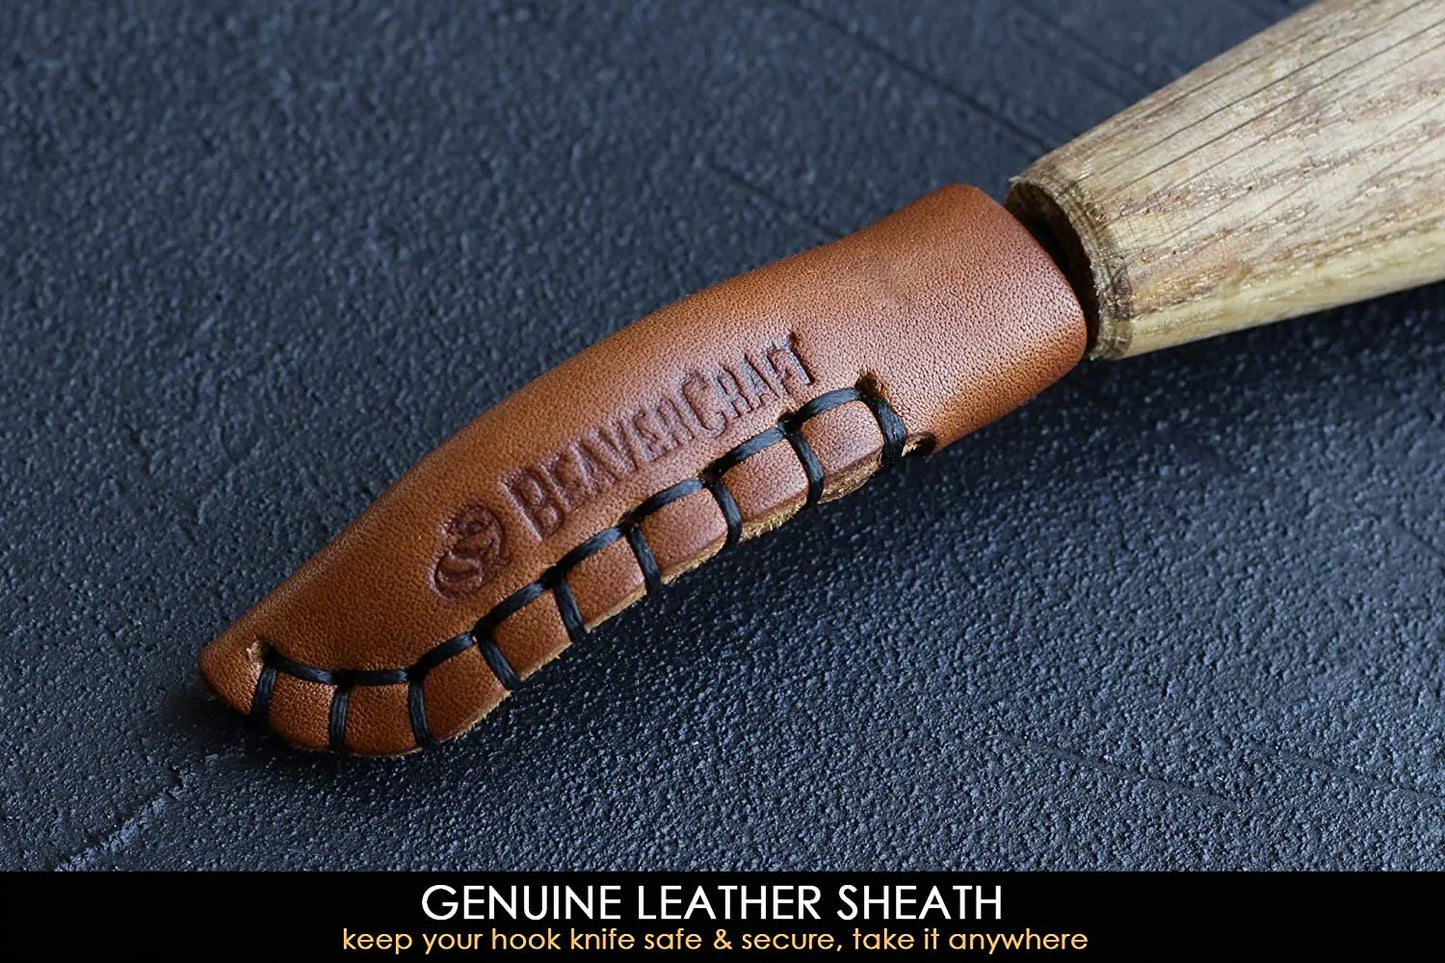 BeaverCraft SK4LS - Left Handed Open Curve Spoon Knife with Leather Sheath